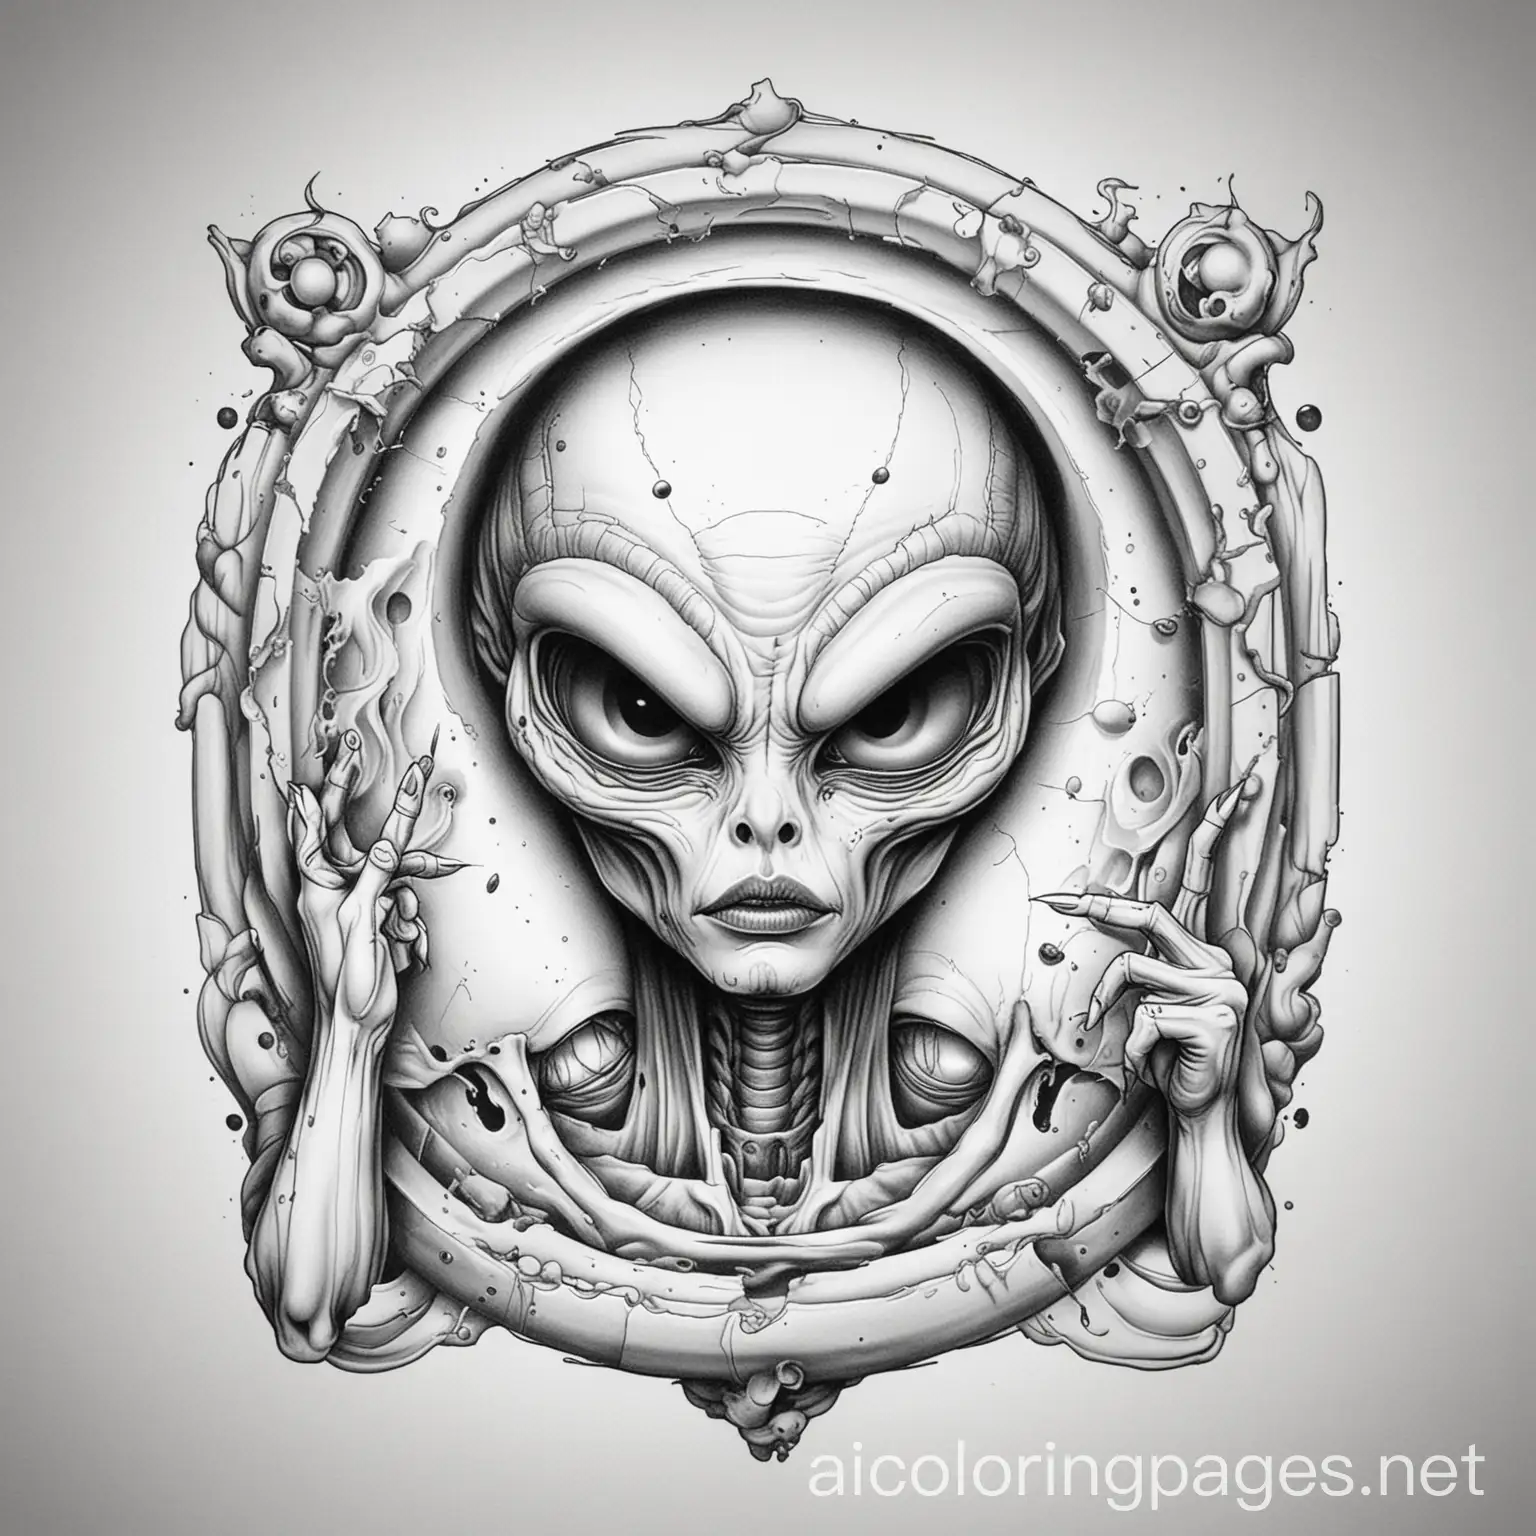 Alien face smoking a joint with an open portal behind them while throwing up the peace sign, tattoo, graffiti, black and white, coloring book, Coloring Page, black and white, line art, white background, Simplicity, Ample White Space. The background of the coloring page is plain white to make it easy for young children to color within the lines. The outlines of all the subjects are easy to distinguish, making it simple for kids to color without too much difficulty